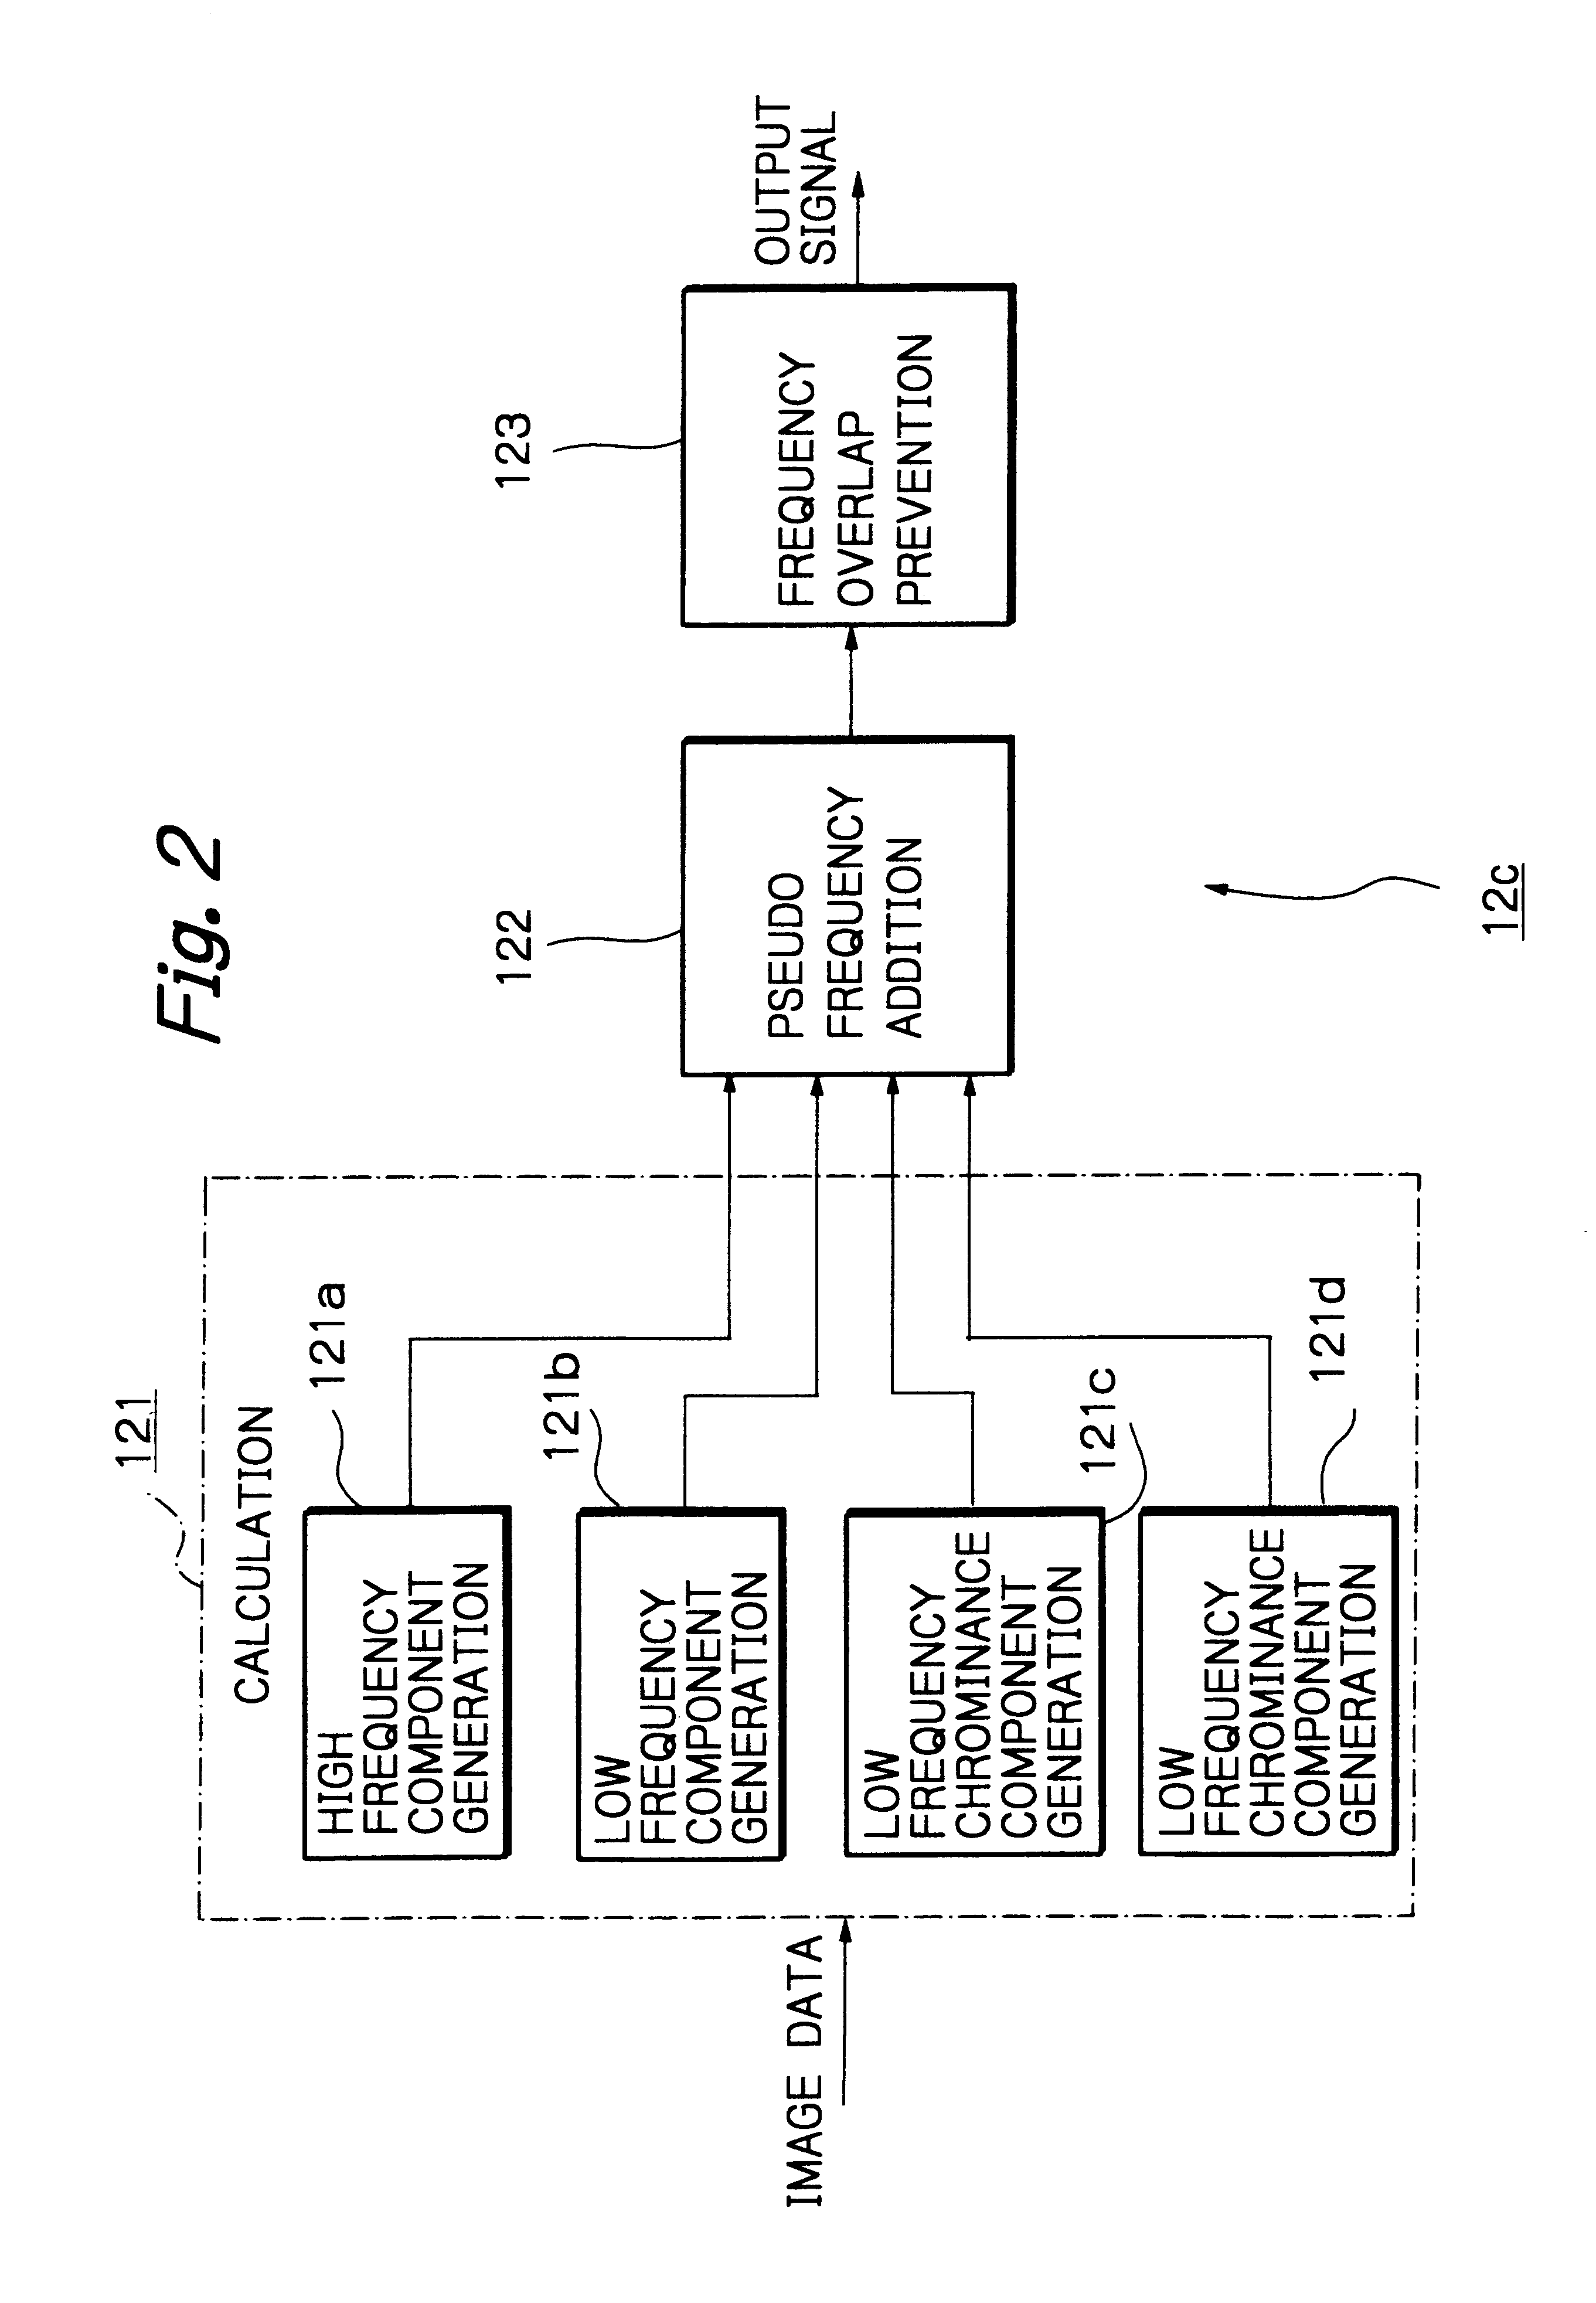 Solid-state imaging apparatus and signal processing method for transforming image signals output from a honeycomb arrangement to high quality video signals